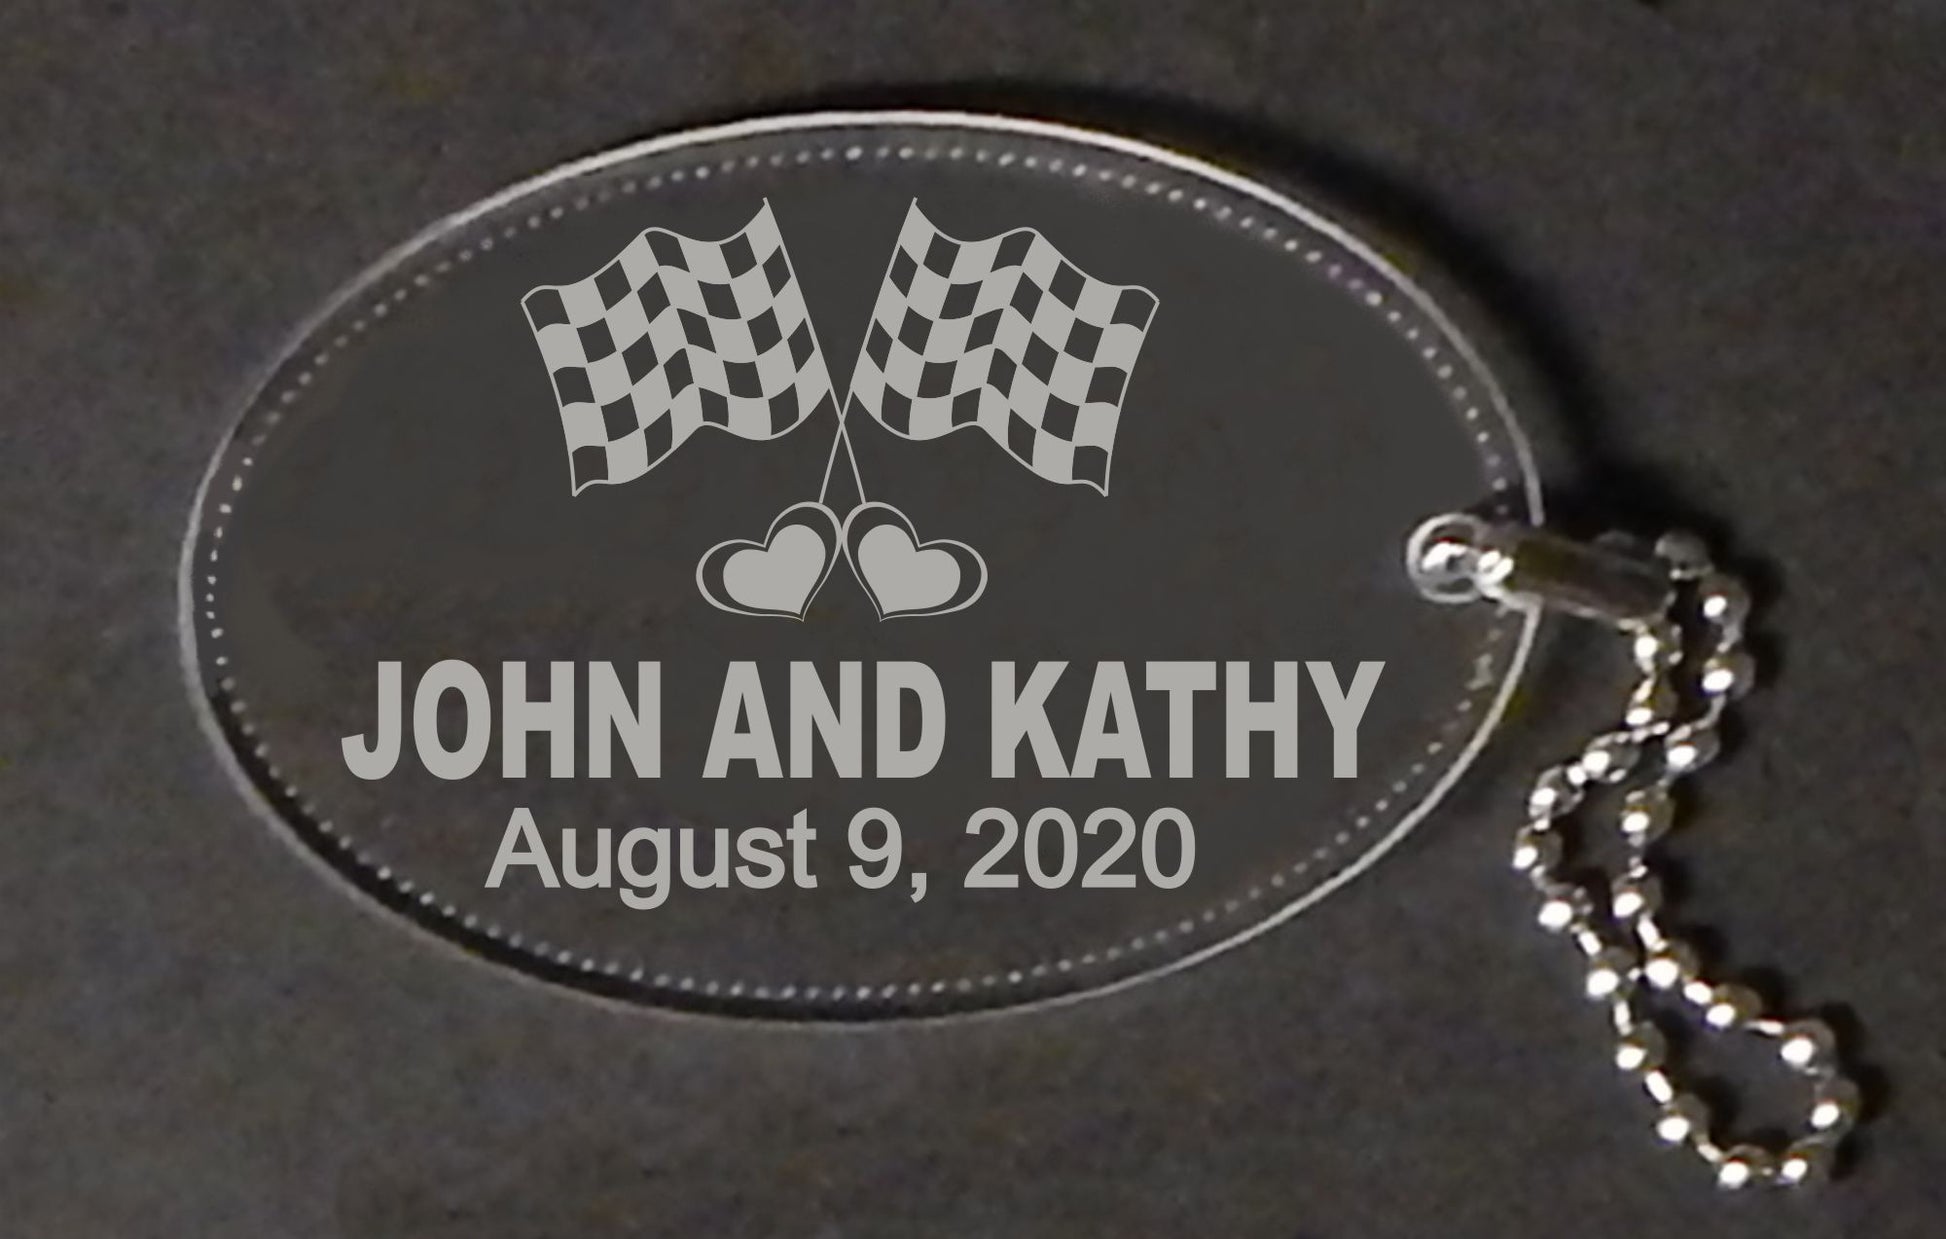 acrylic oval keychain decorated with a set of racing flags and engraved with names and date, with an attached metal chain